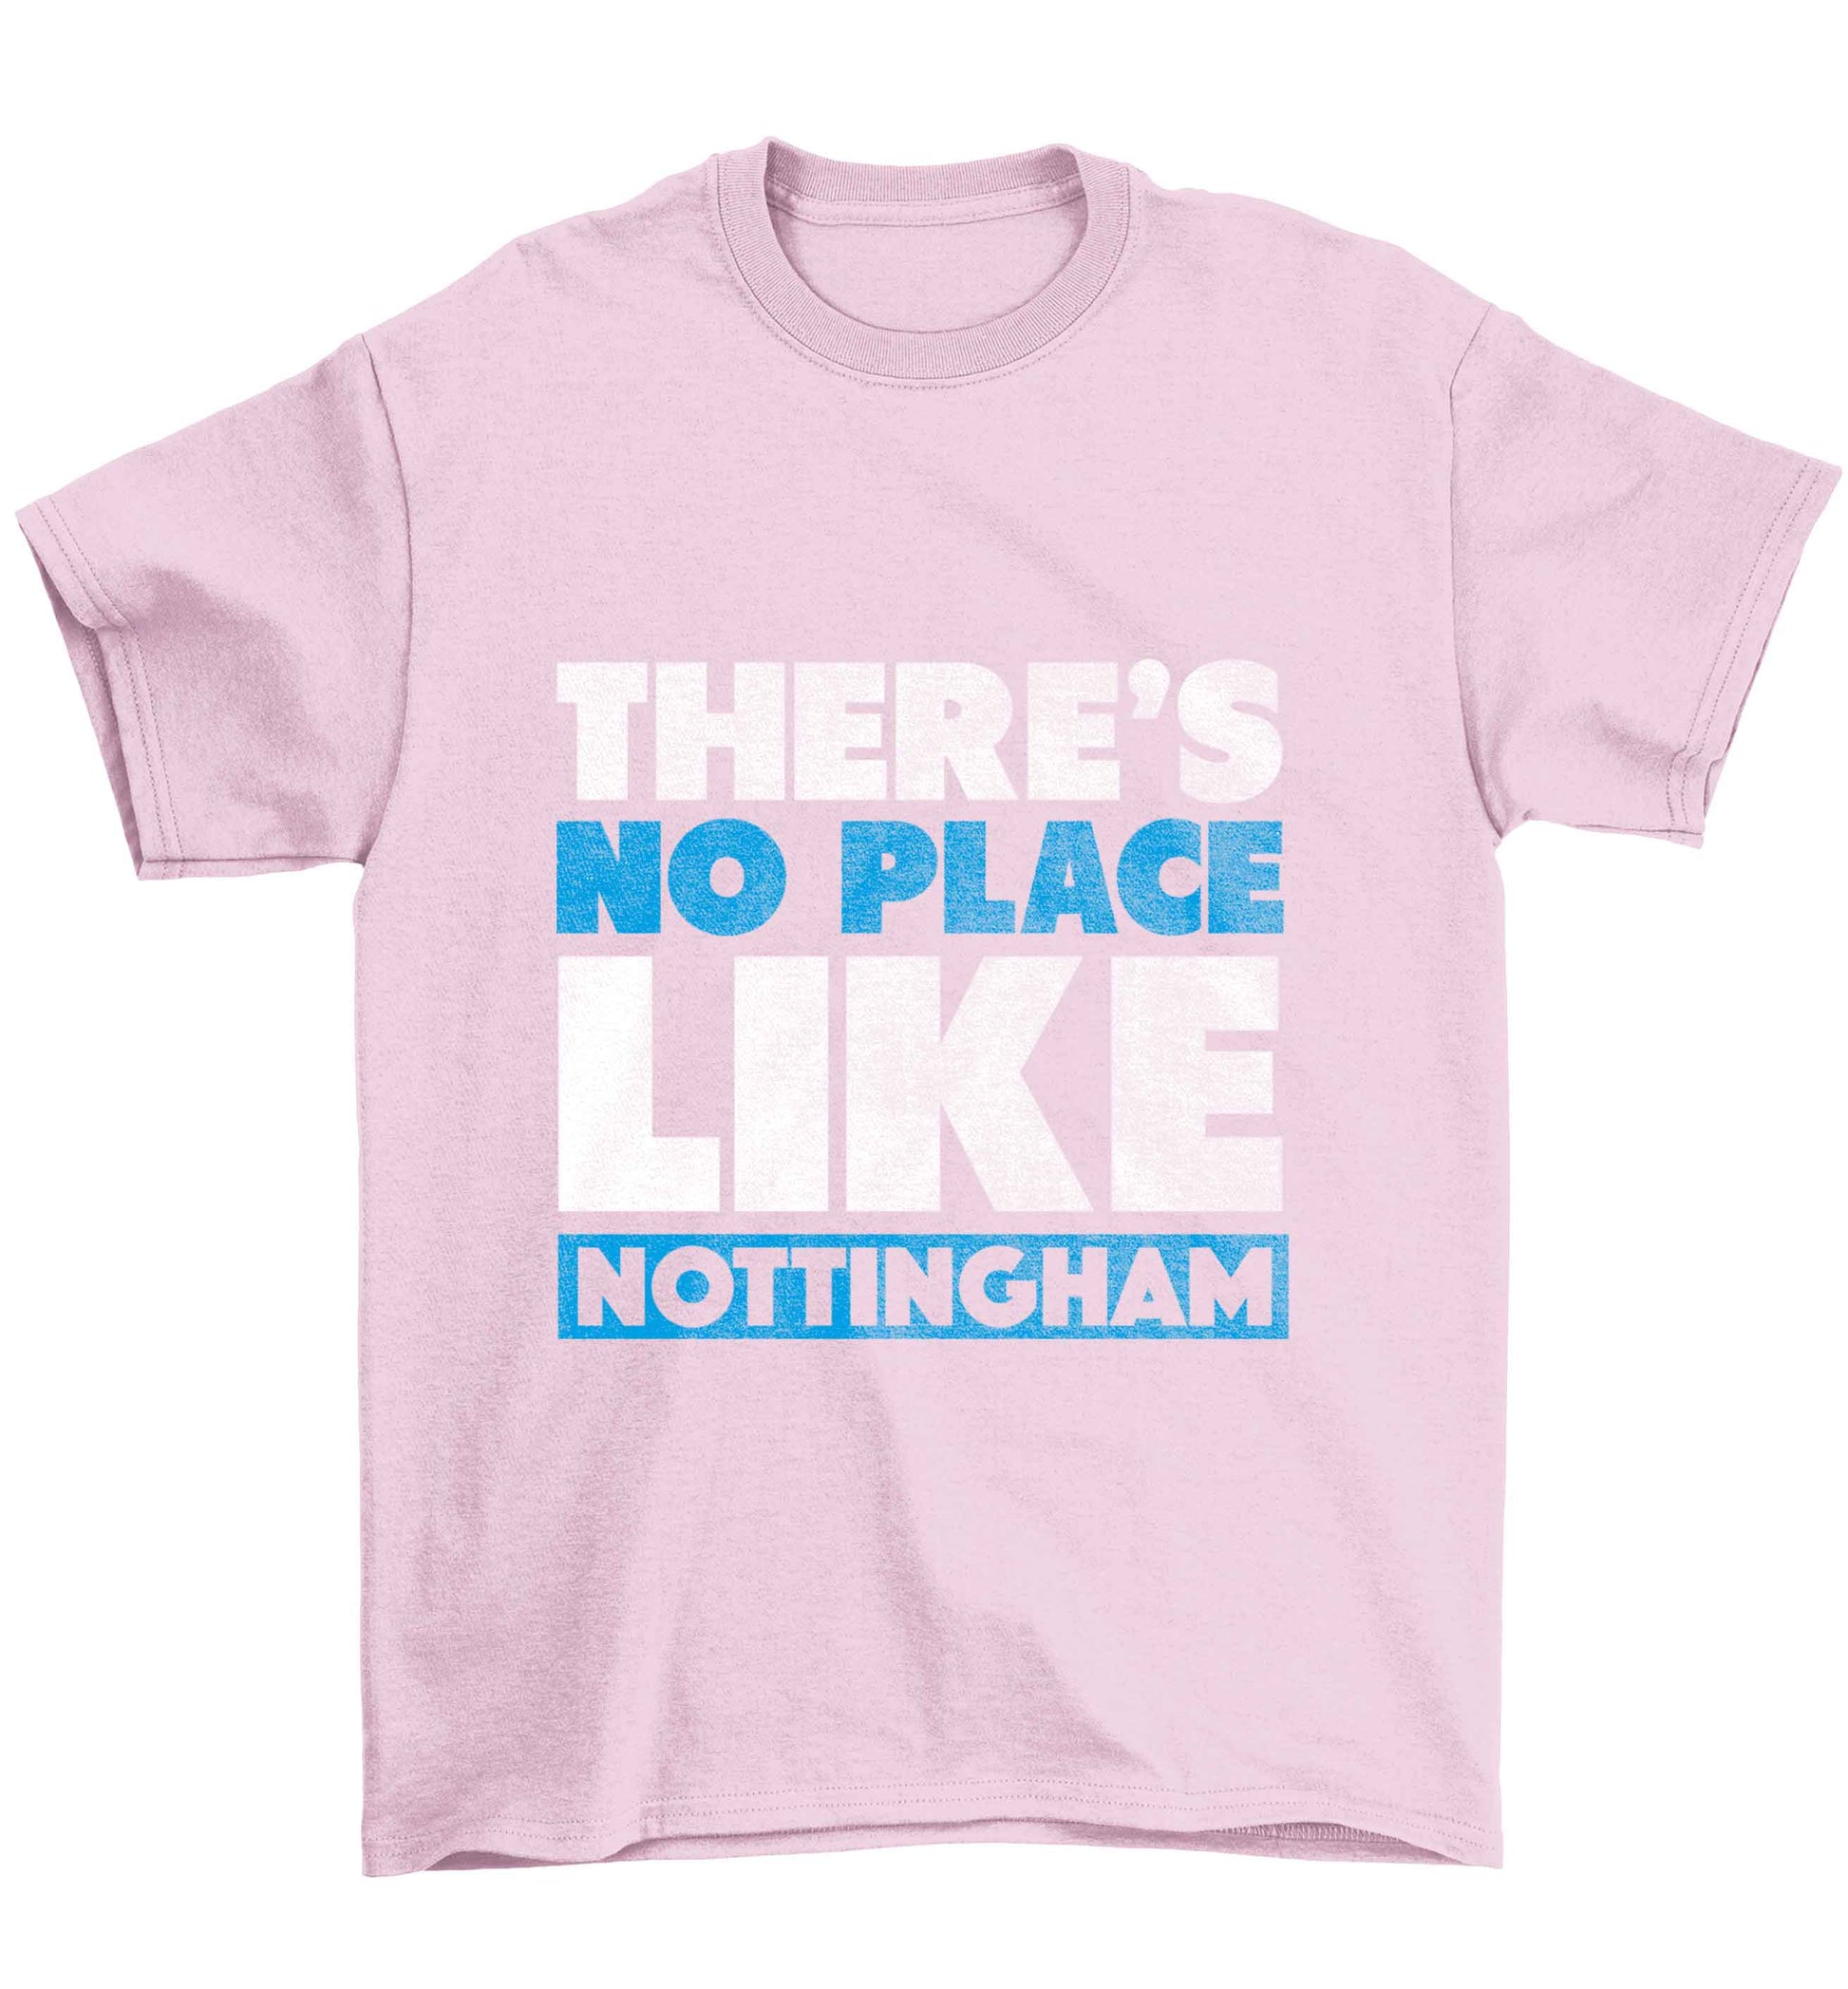 There's no place like Nottingham Children's light pink Tshirt 12-13 Years